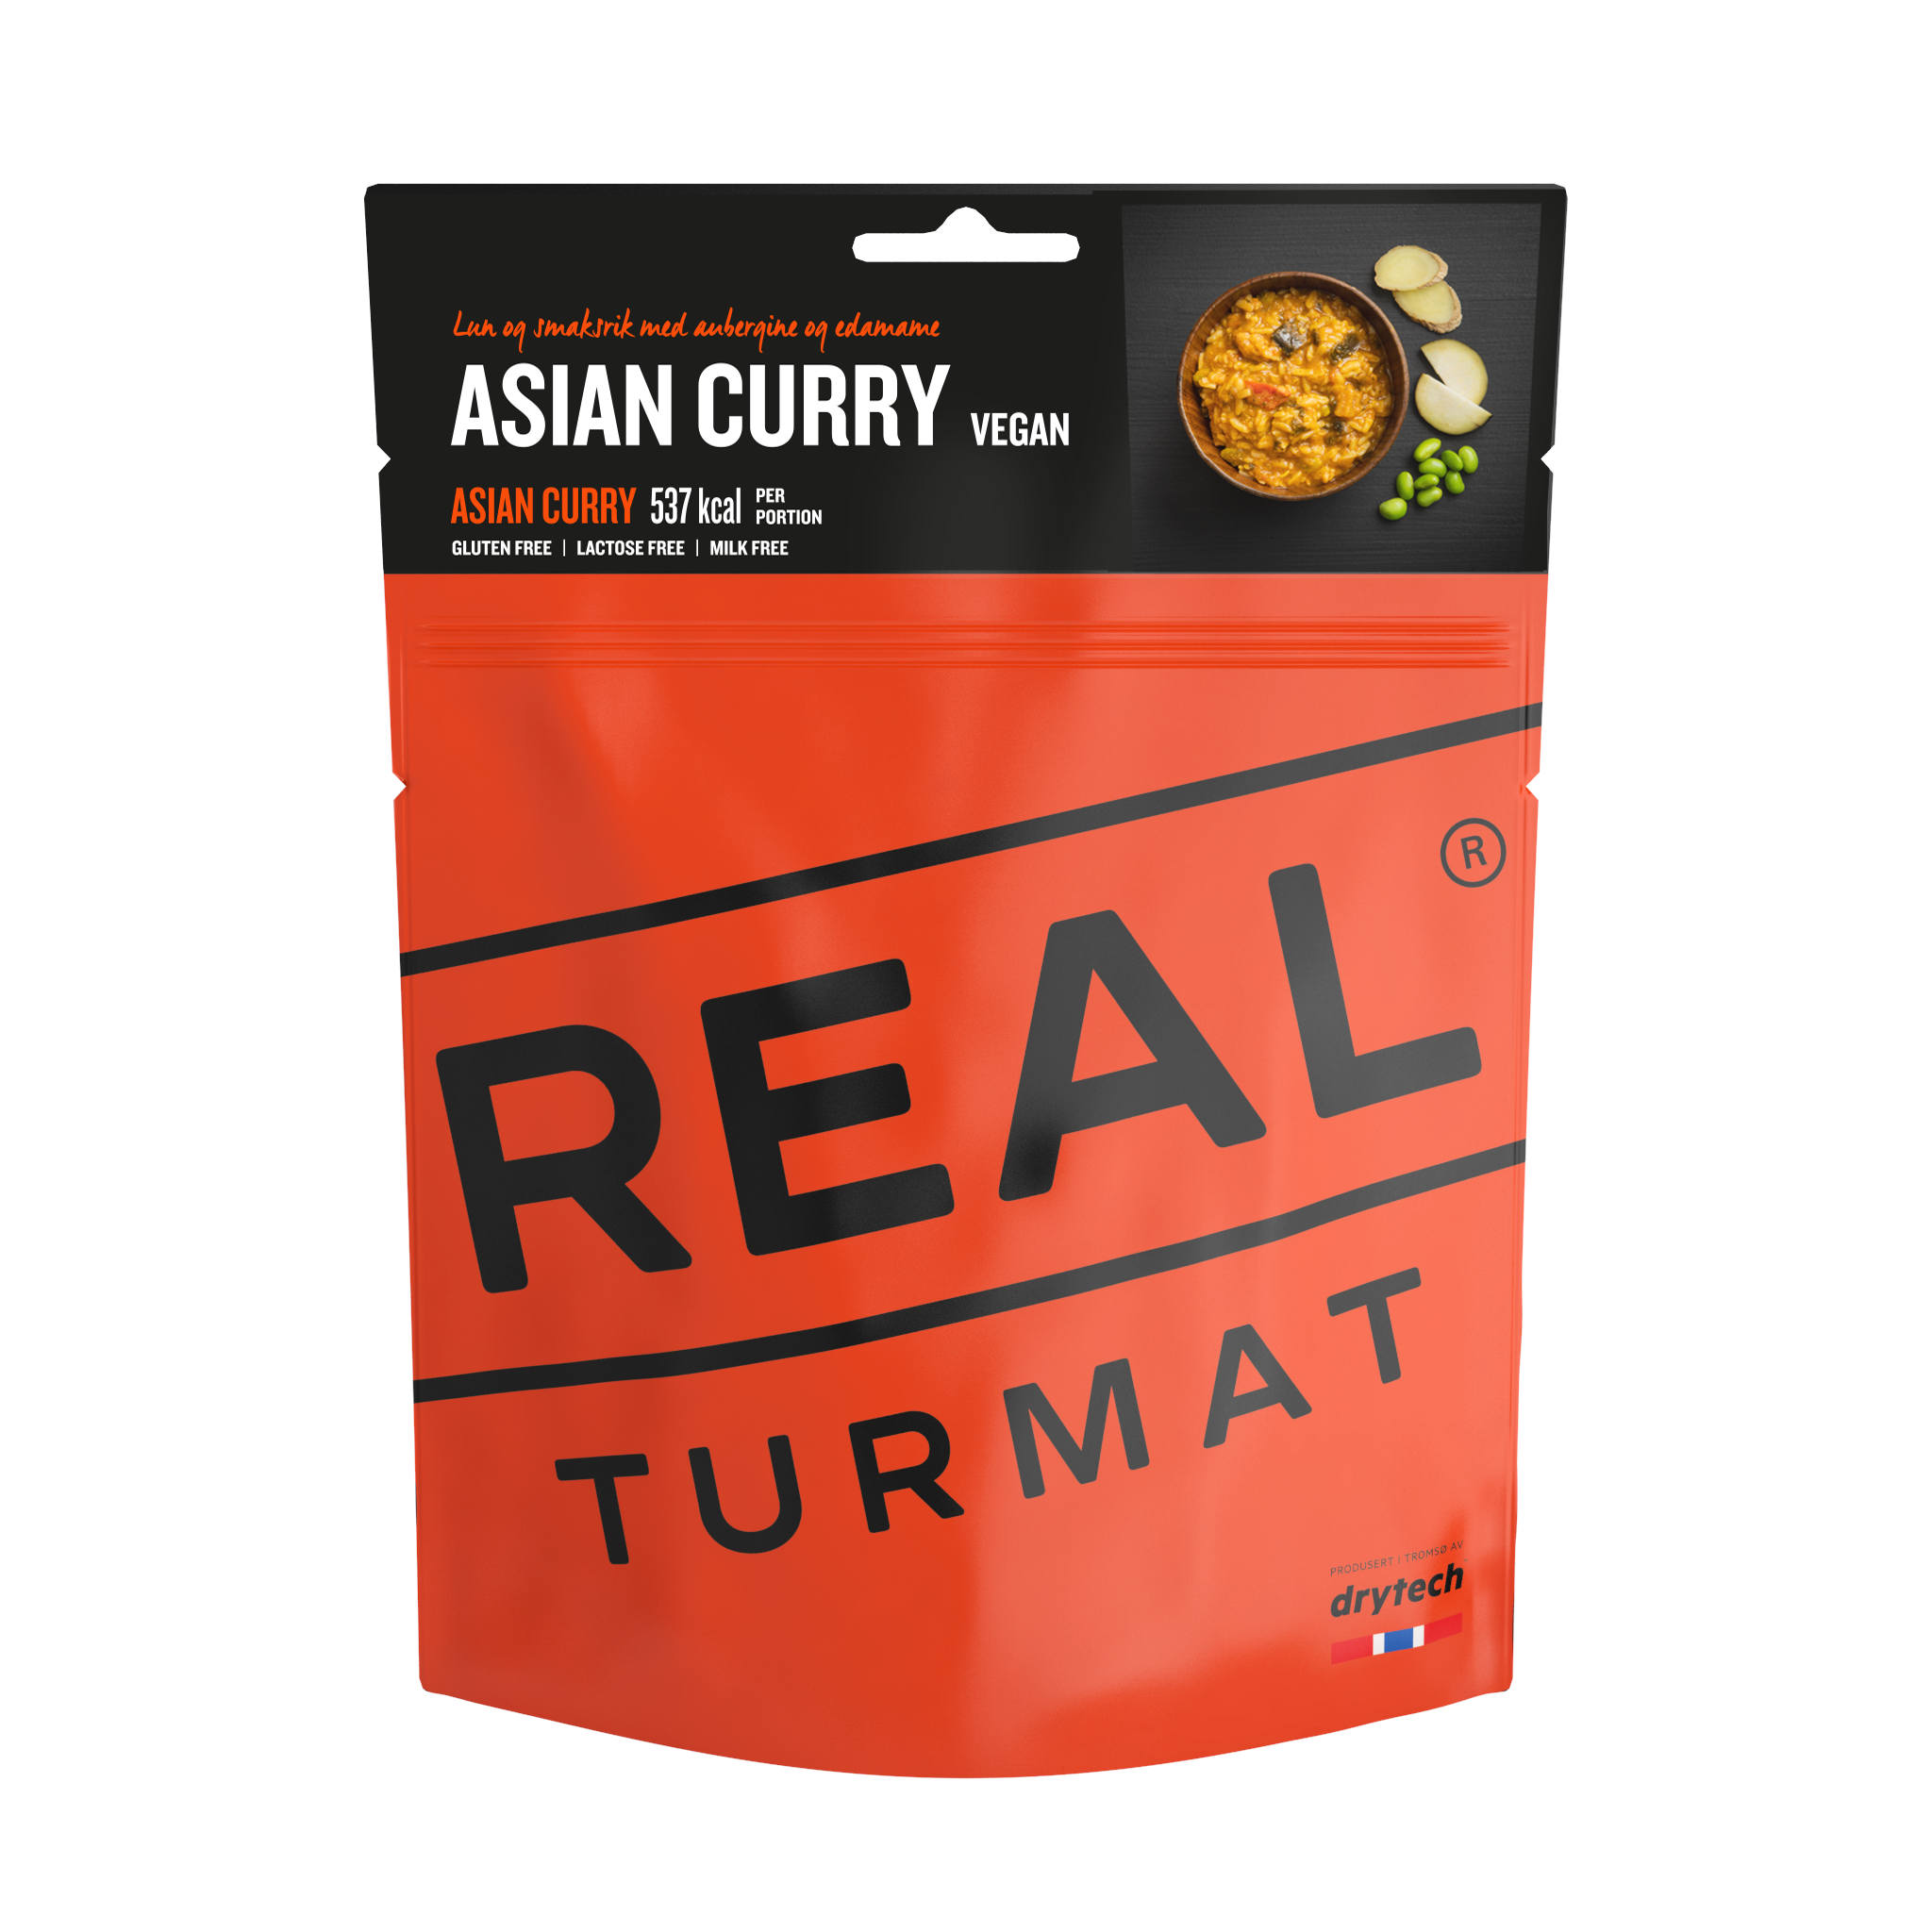 REAL TURMAT Asian Curry 500 gr